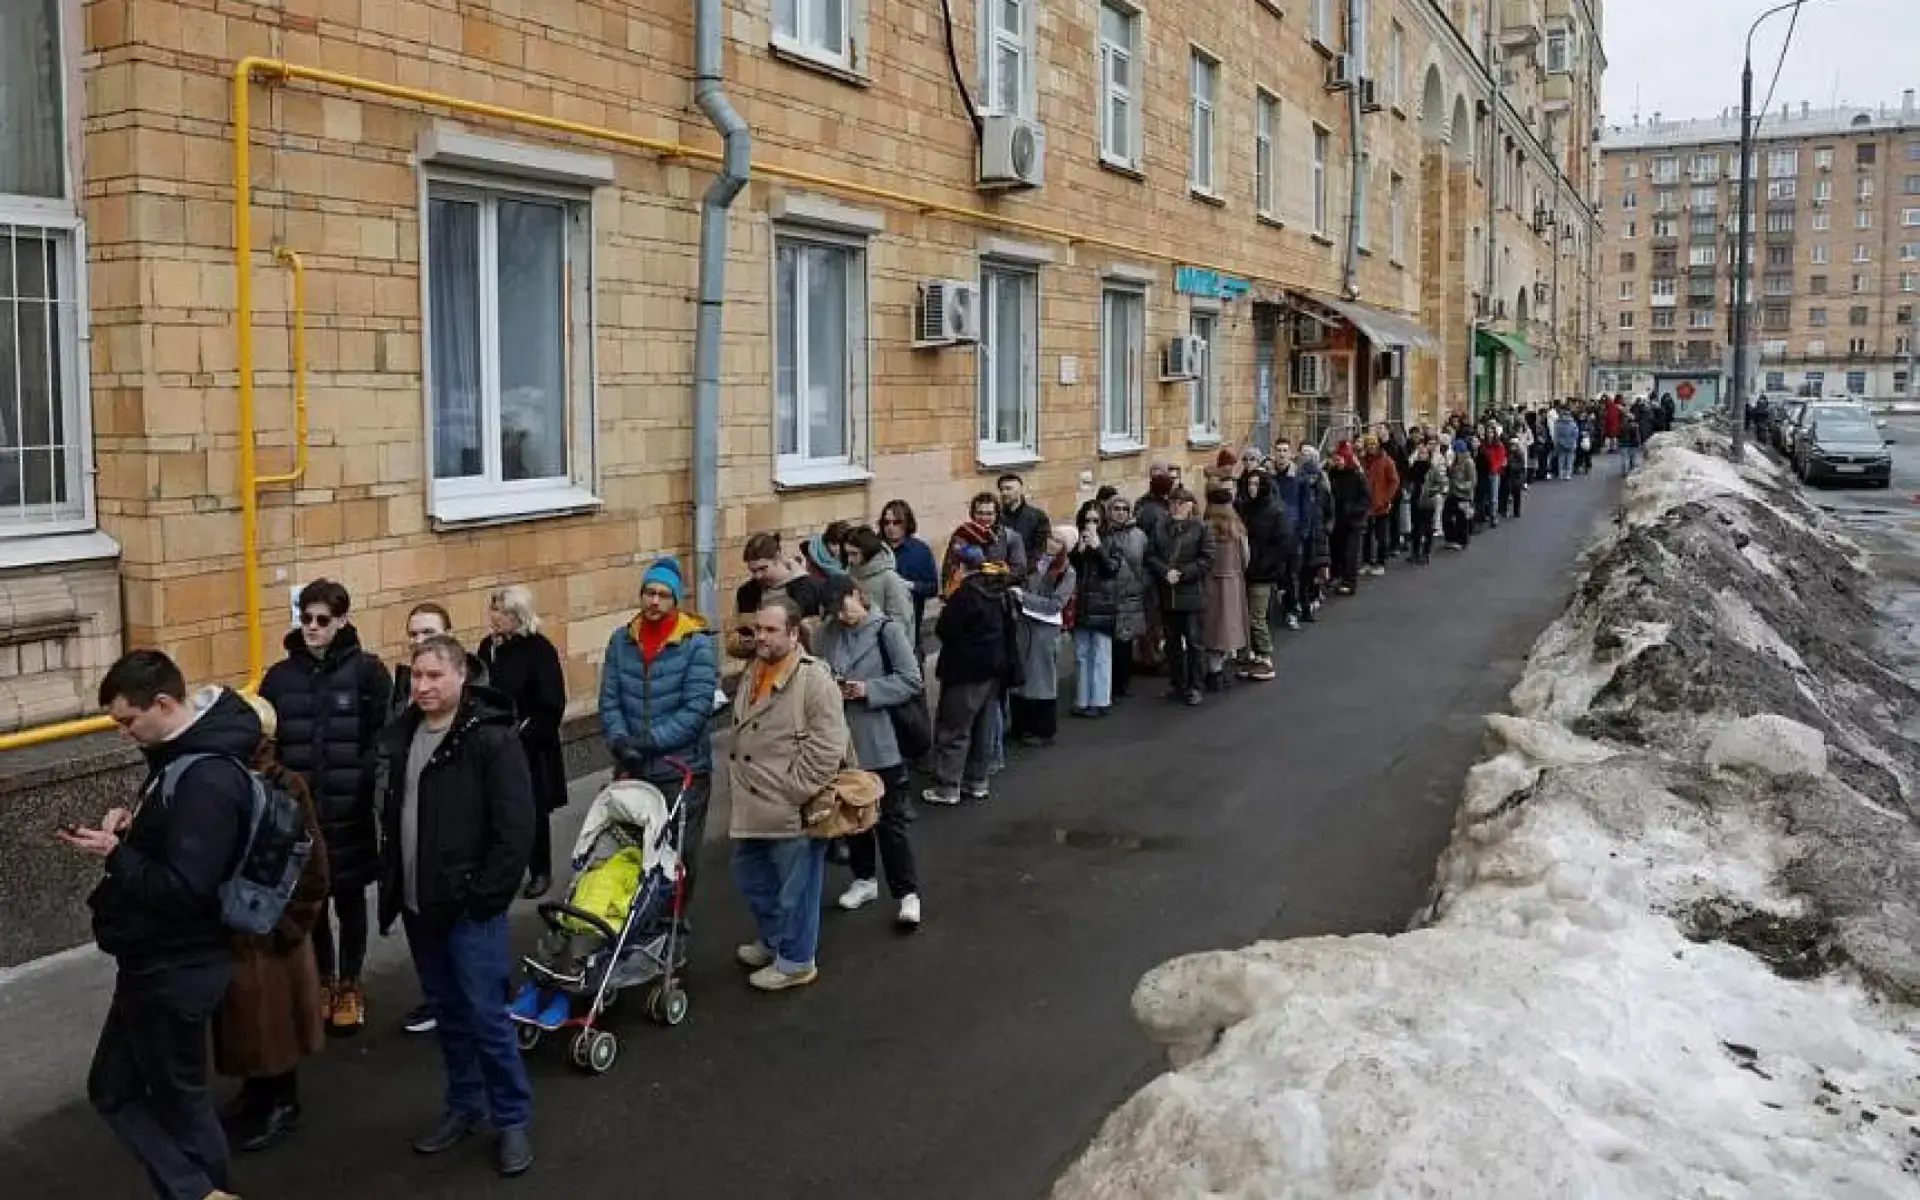 Protests at polling stations in Russia are seen as preparations to extend Putin’s long rule